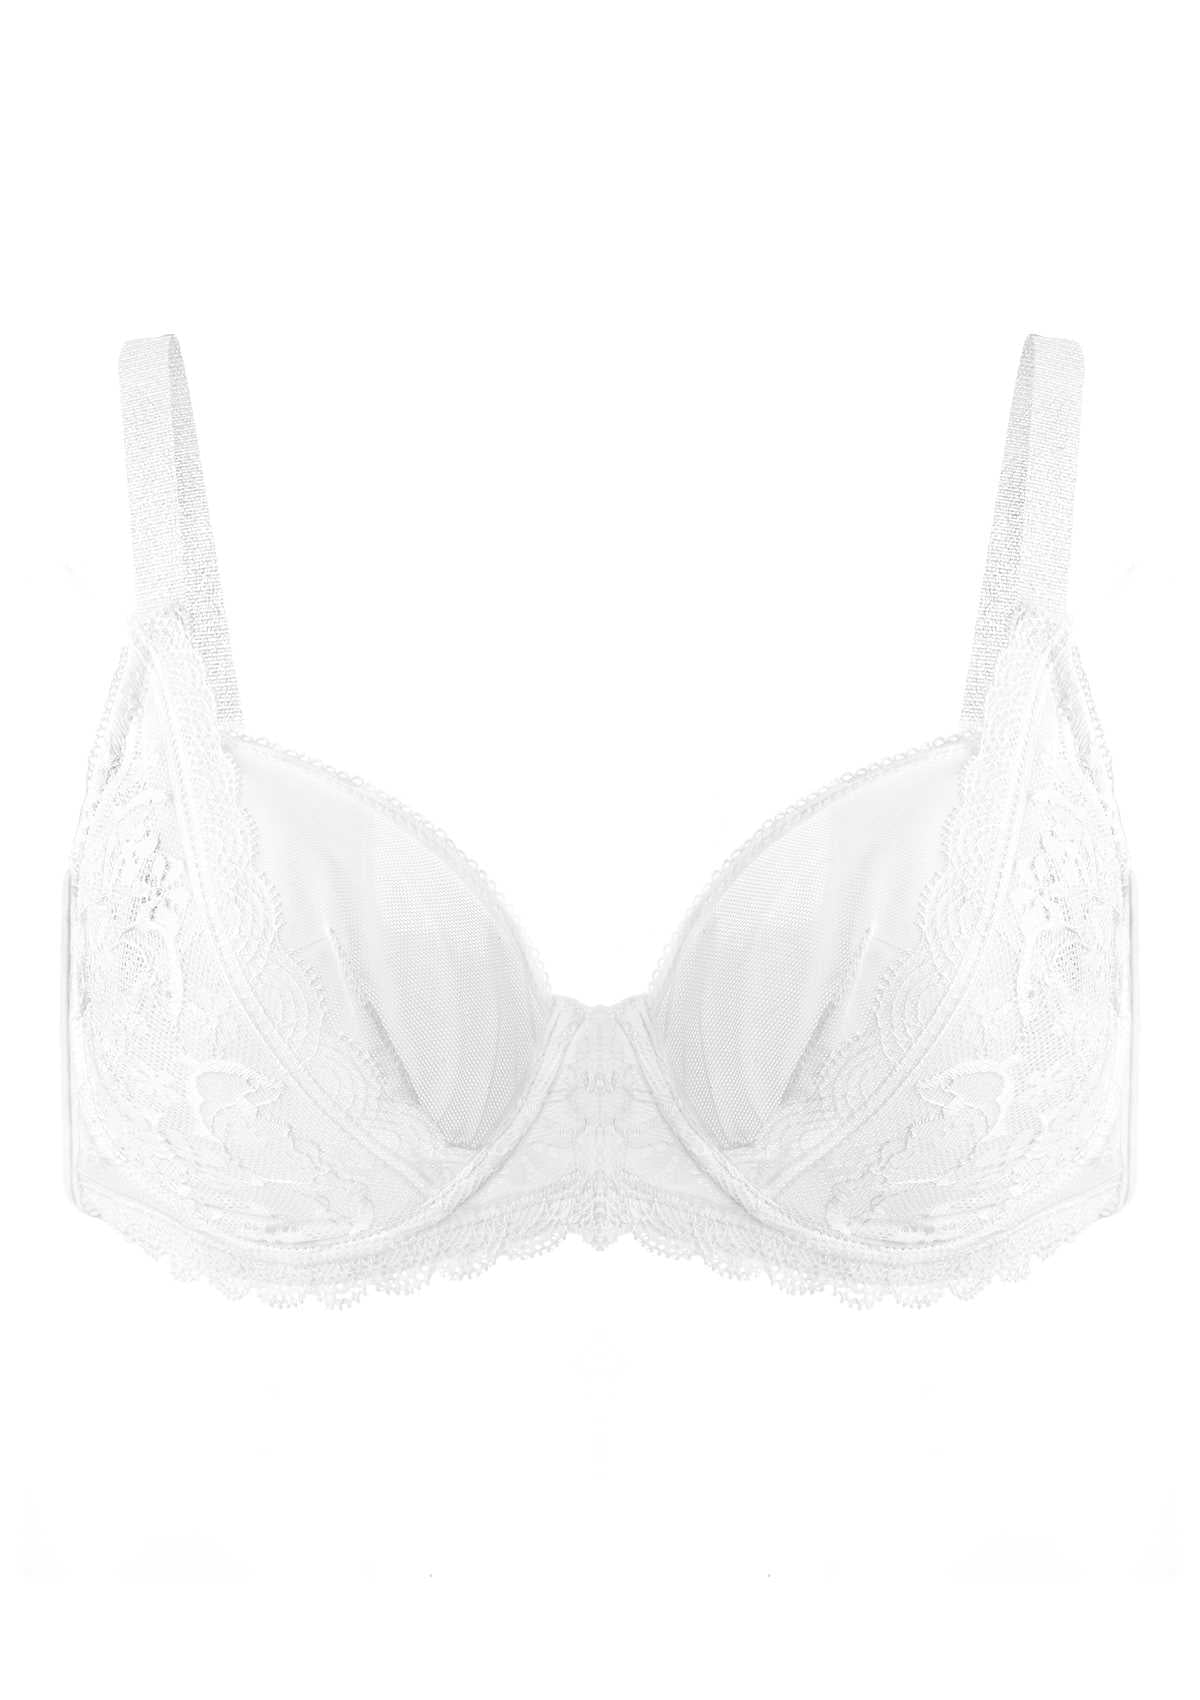 HSIA Anemone Big Bra: Best Bra For Lift And Support, Floral Bra - White / 38 / DDD/F